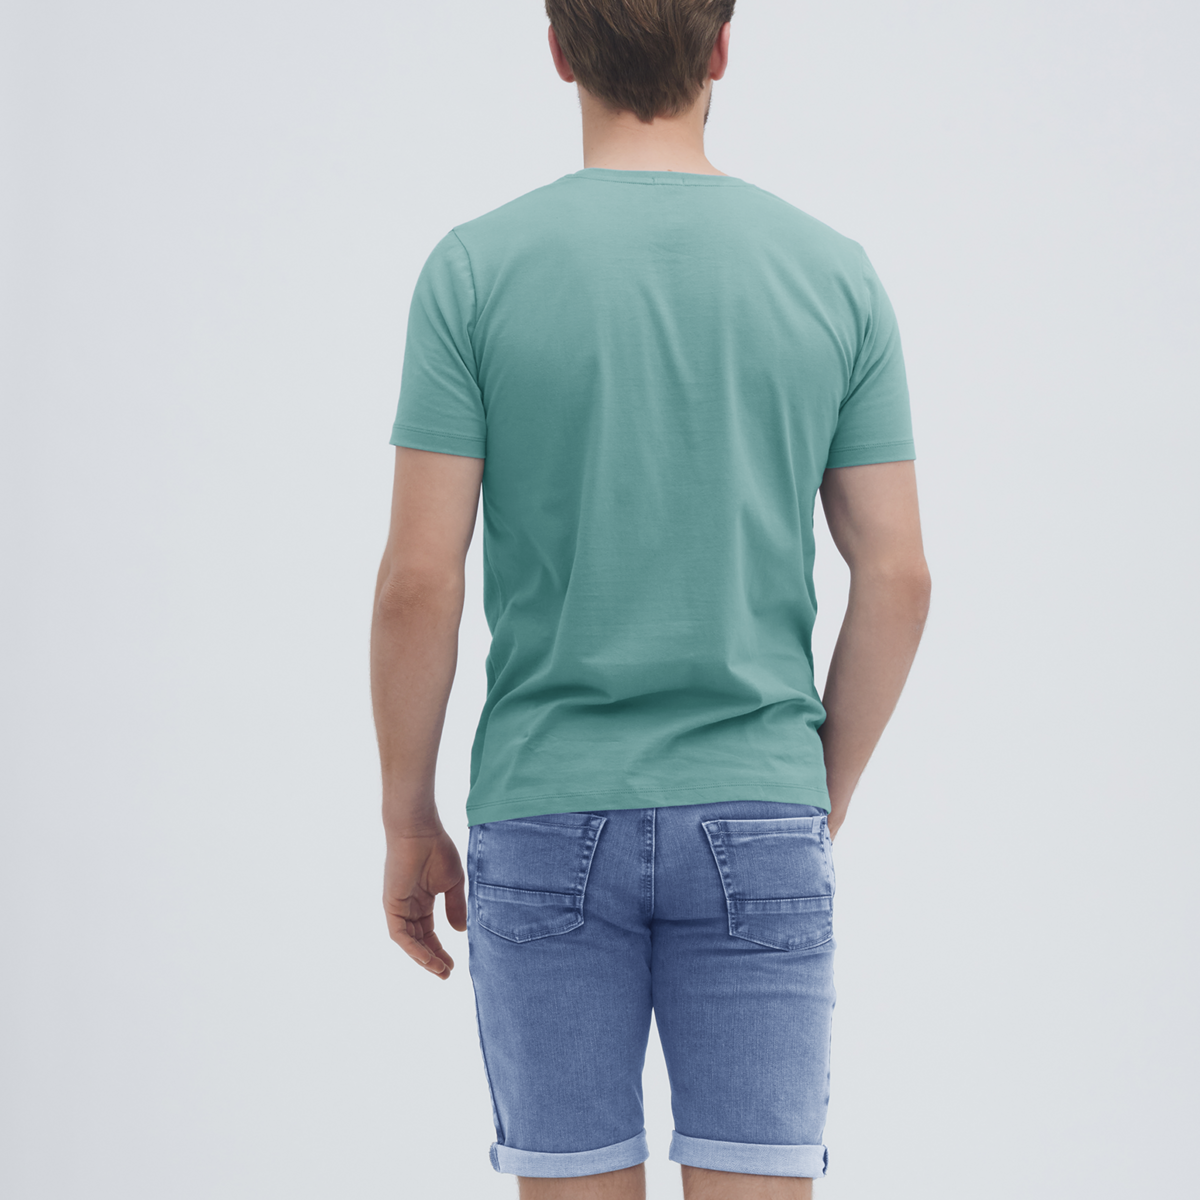 Turquoise Hommes T-Shirt